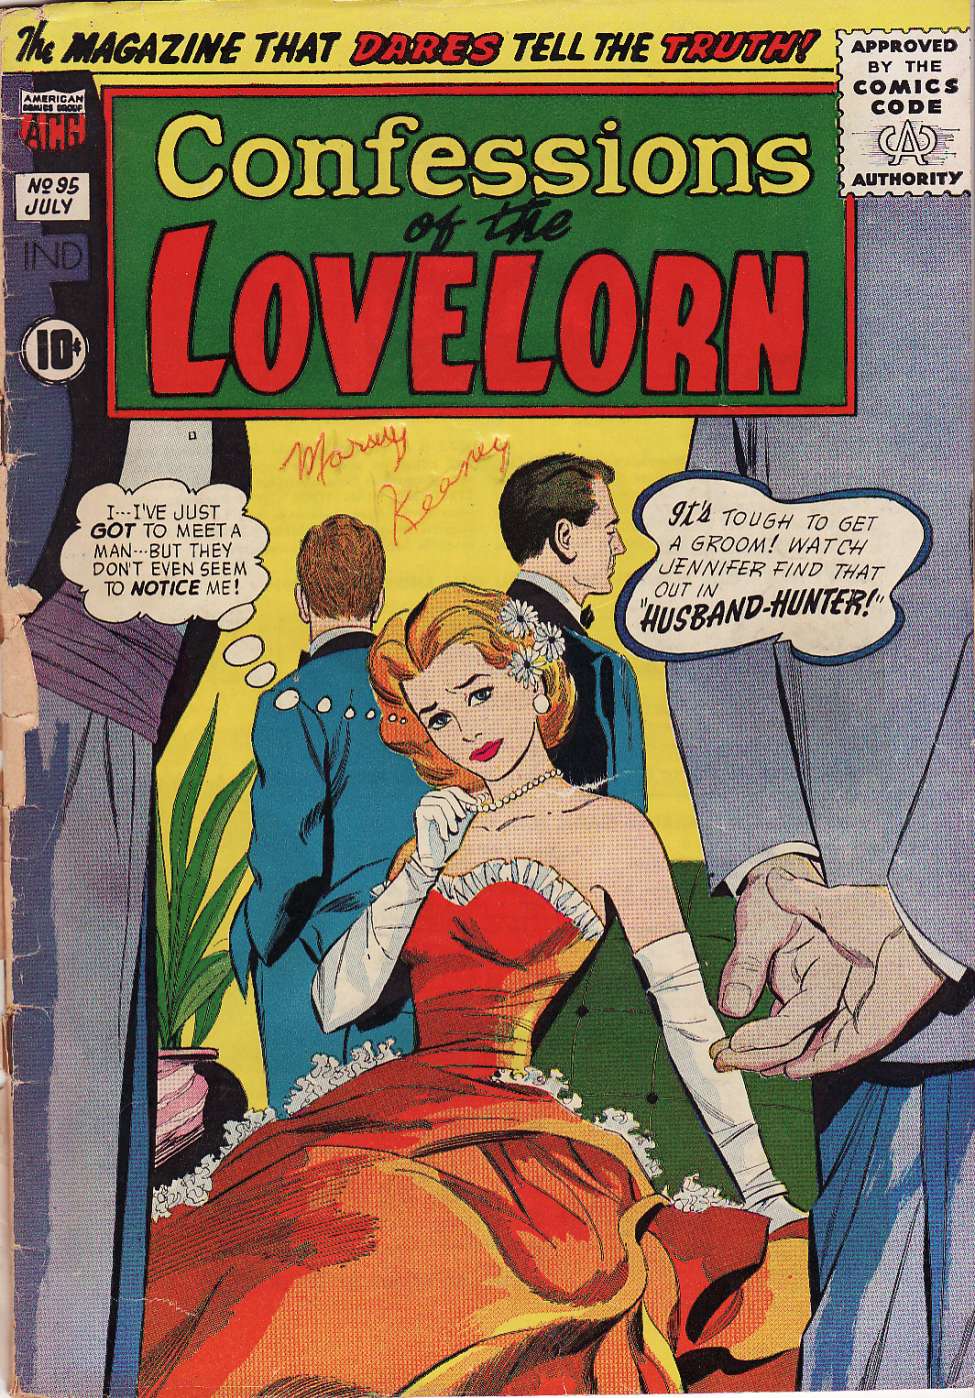 Book Cover For Confessions of the Lovelorn 95